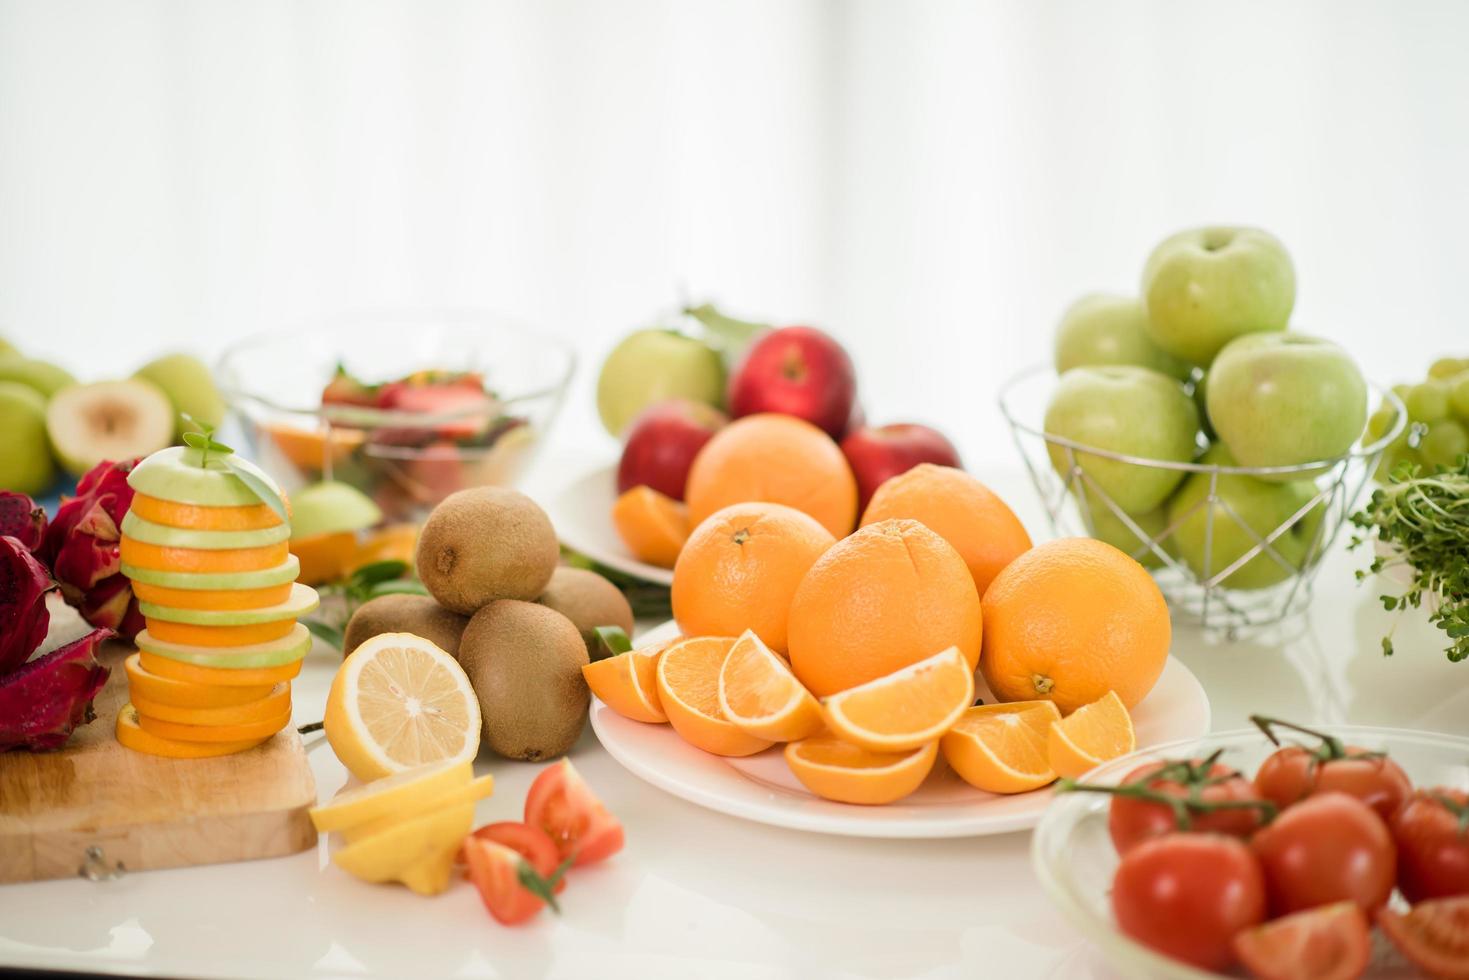 A variety of fresh fruit photo